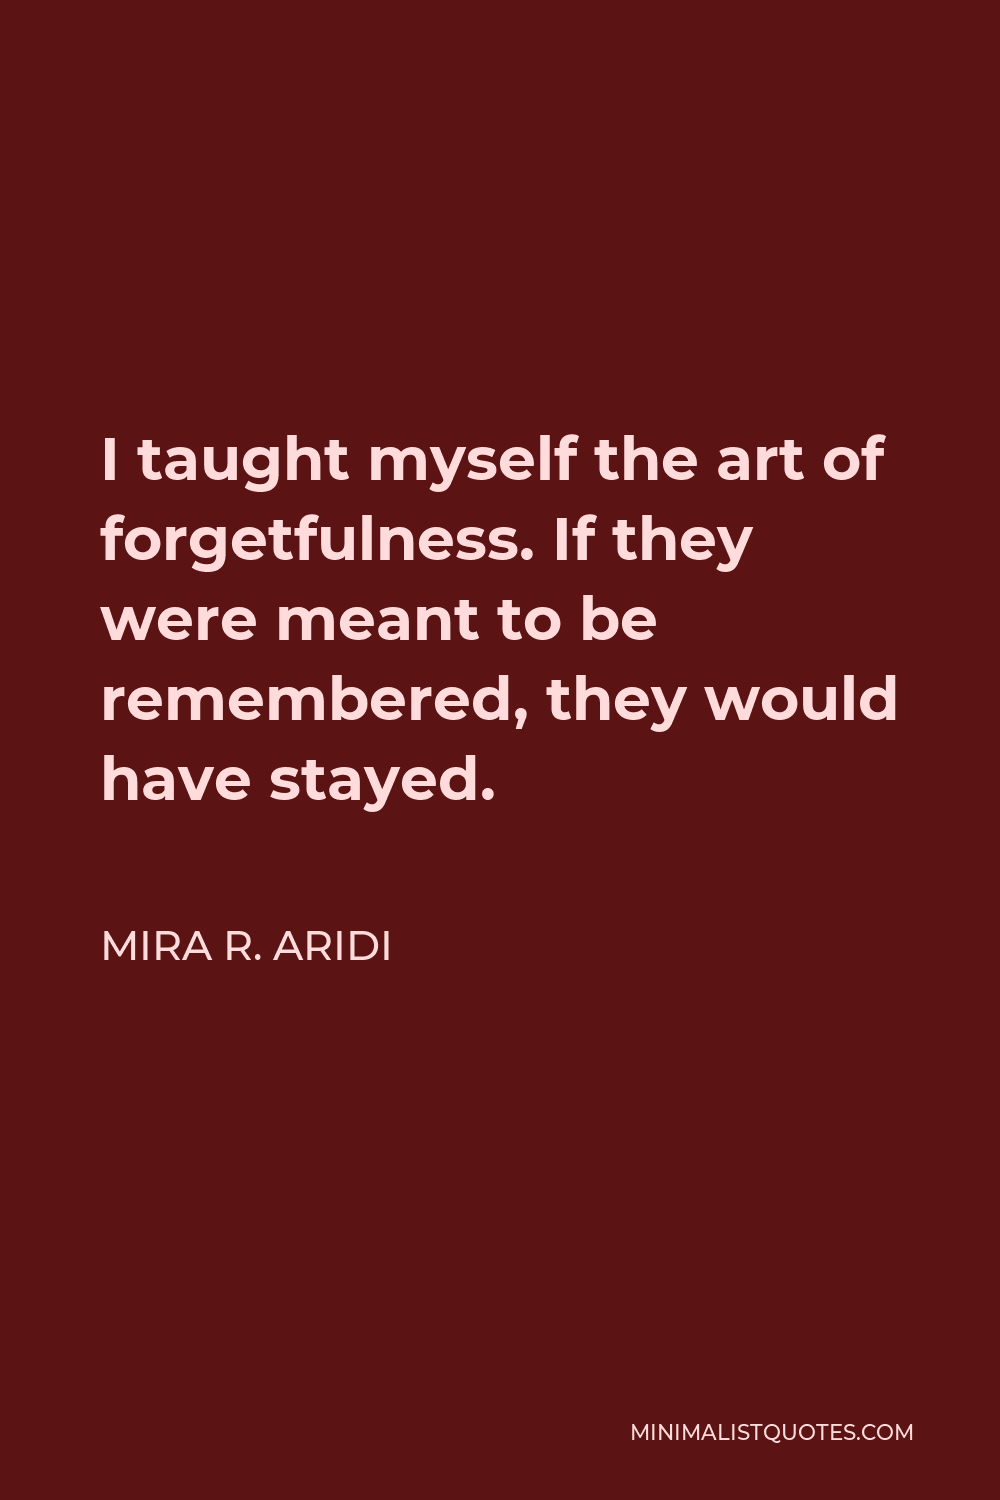 Mira R. Aridi Quote - I taught myself the art of forgetfulness. If they were meant to be remembered, they would have stayed.